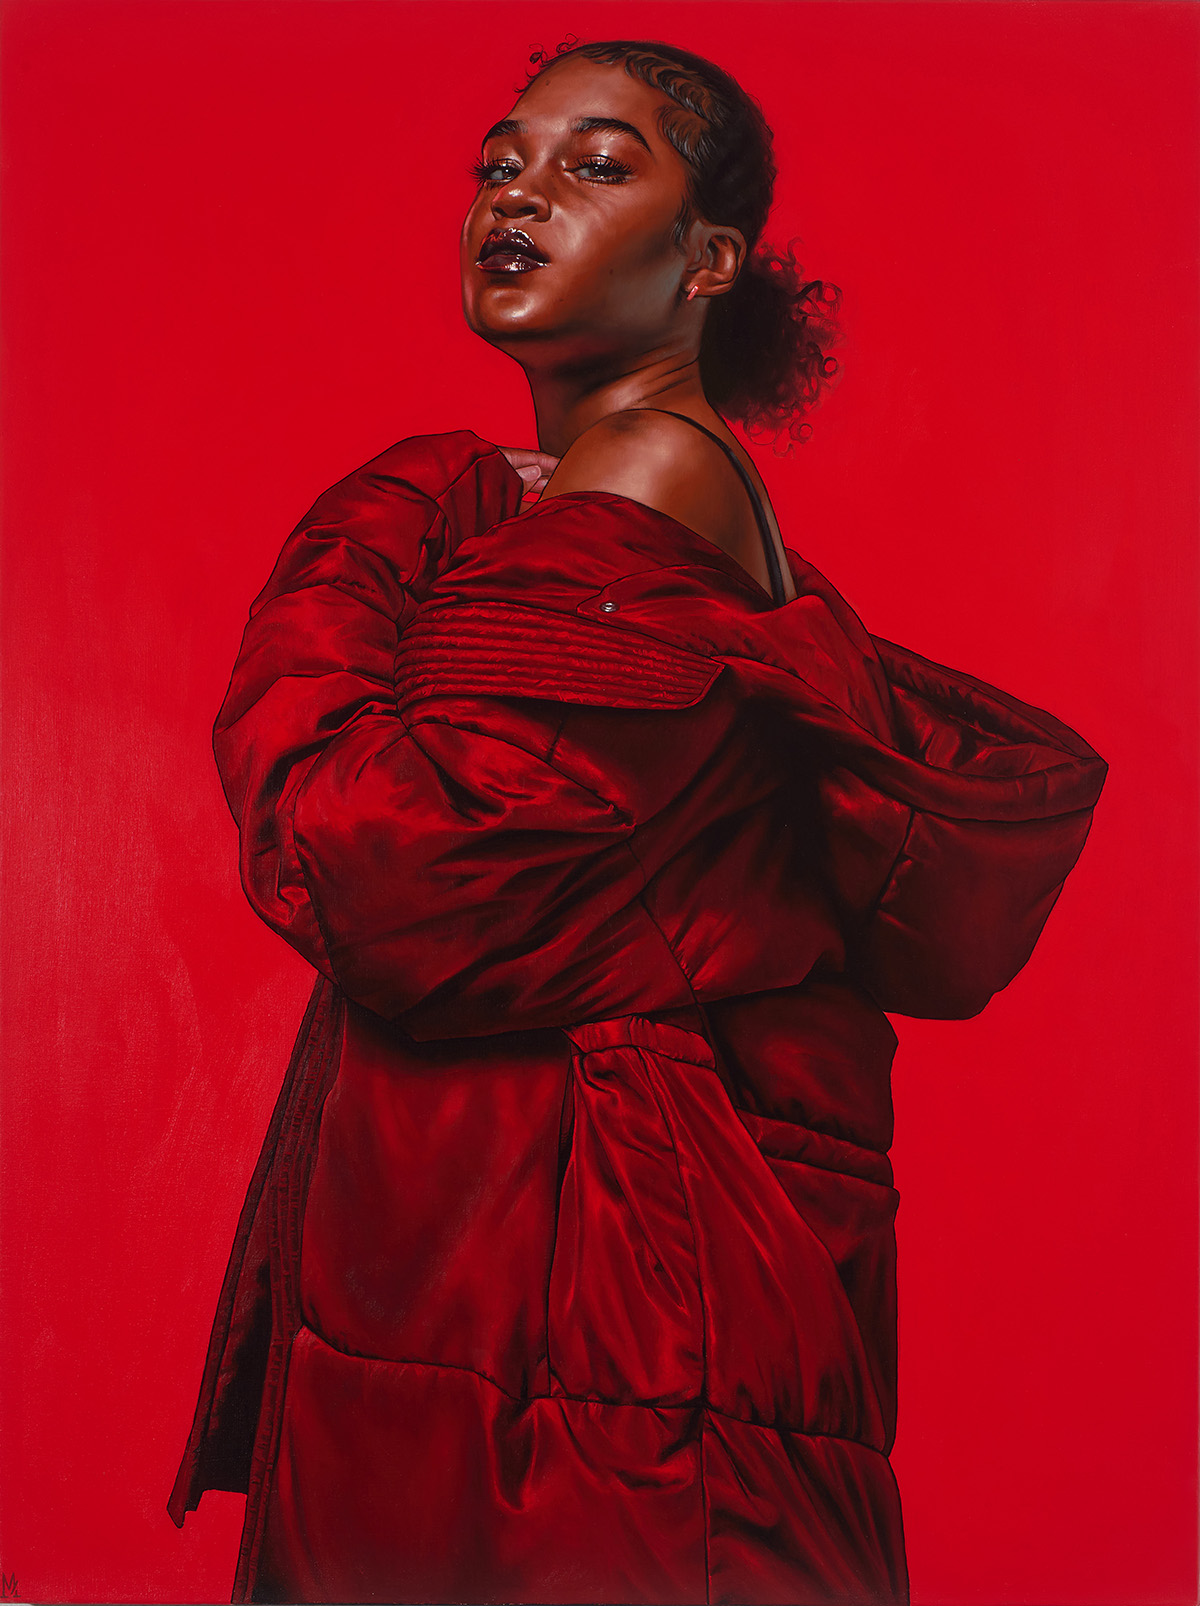 One of two paintings featuring a Black woman wearing an oversized parka. In one image, the parka is open and in the other it is closed. The background of the image and all clothing is red.